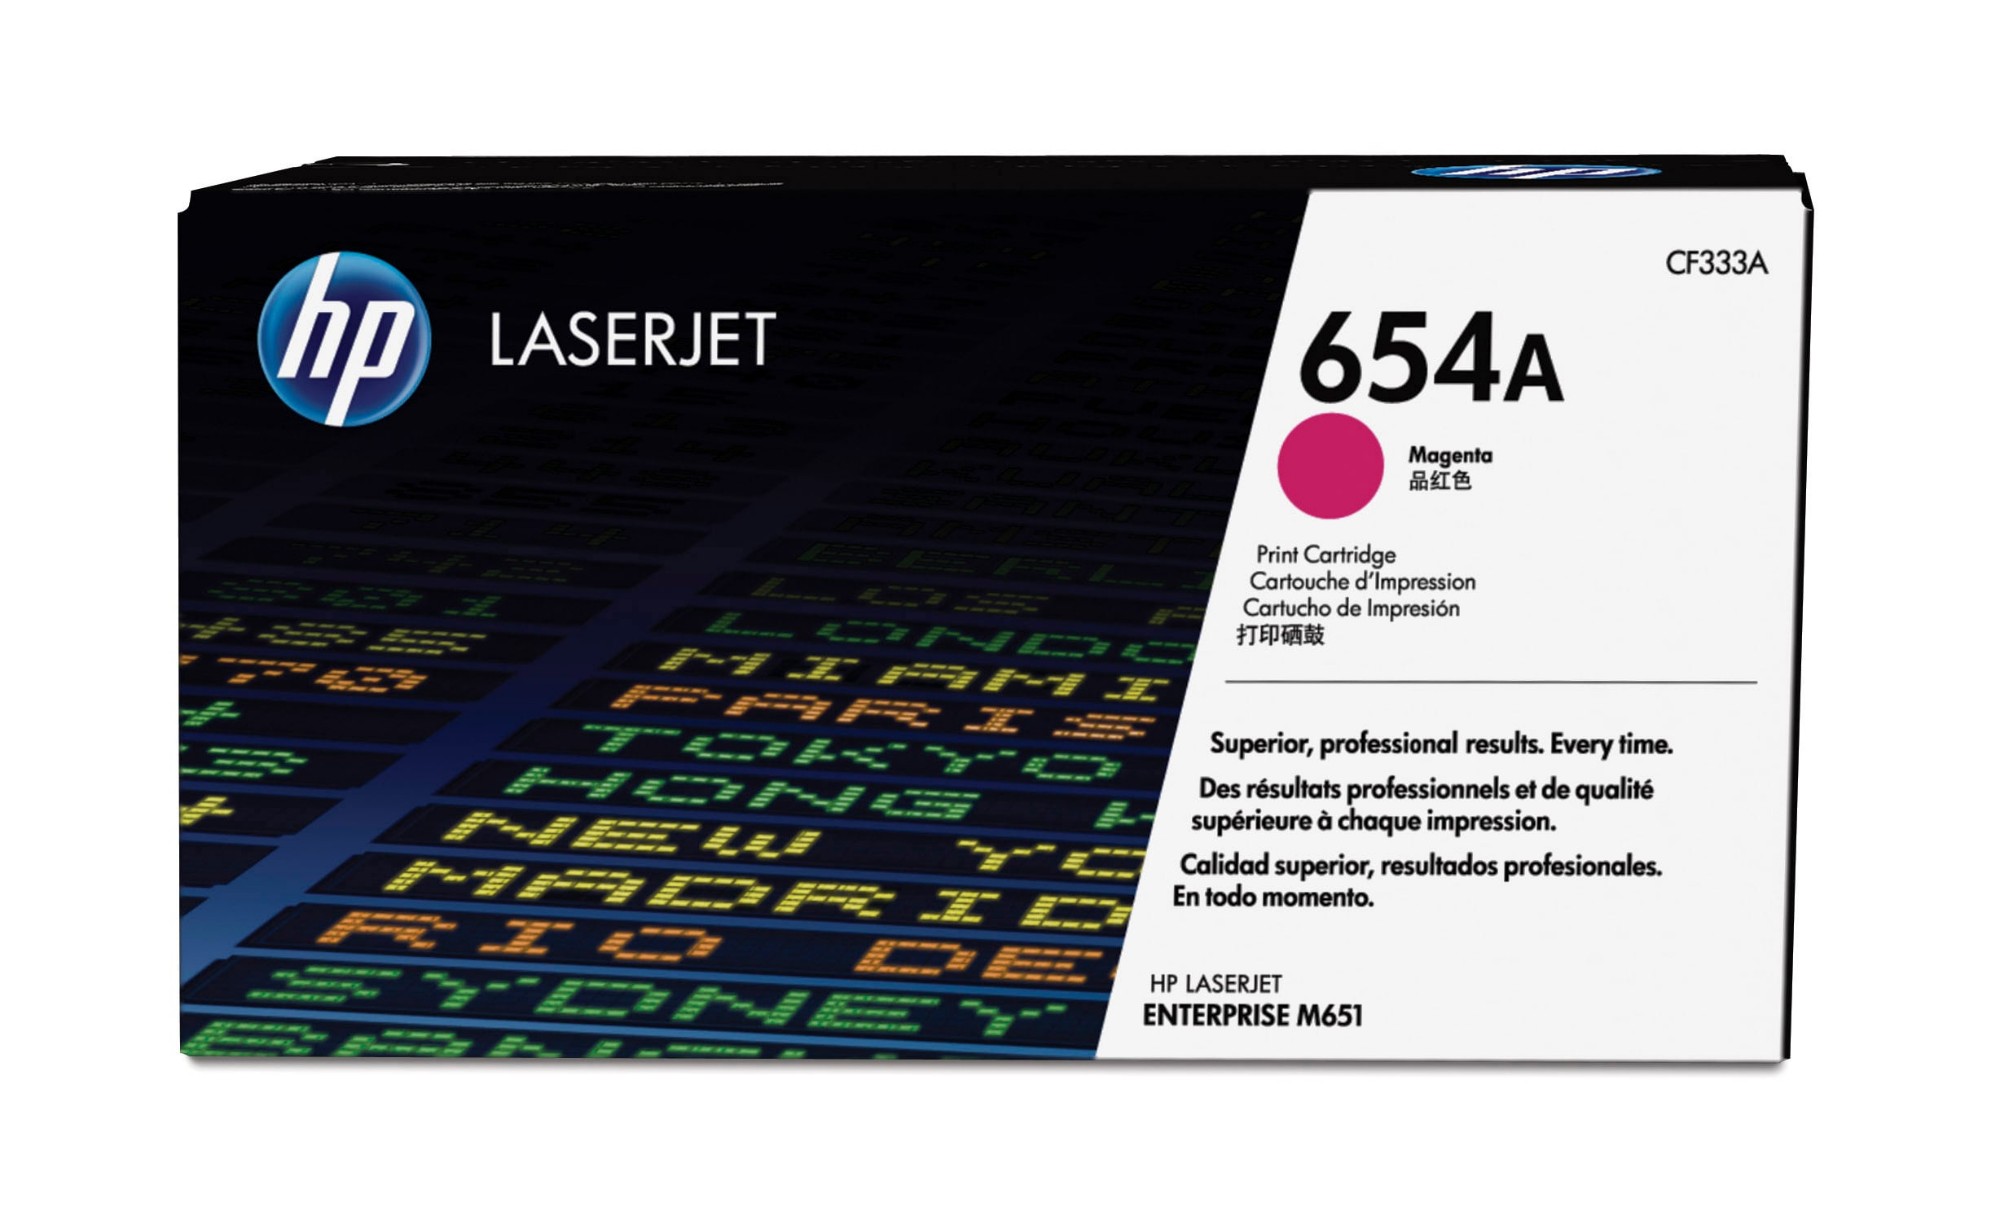 HP CF333A/654A Toner cartridge magenta, 15K pages ISO/IEC 19798 for HP Color LaserJet M 651